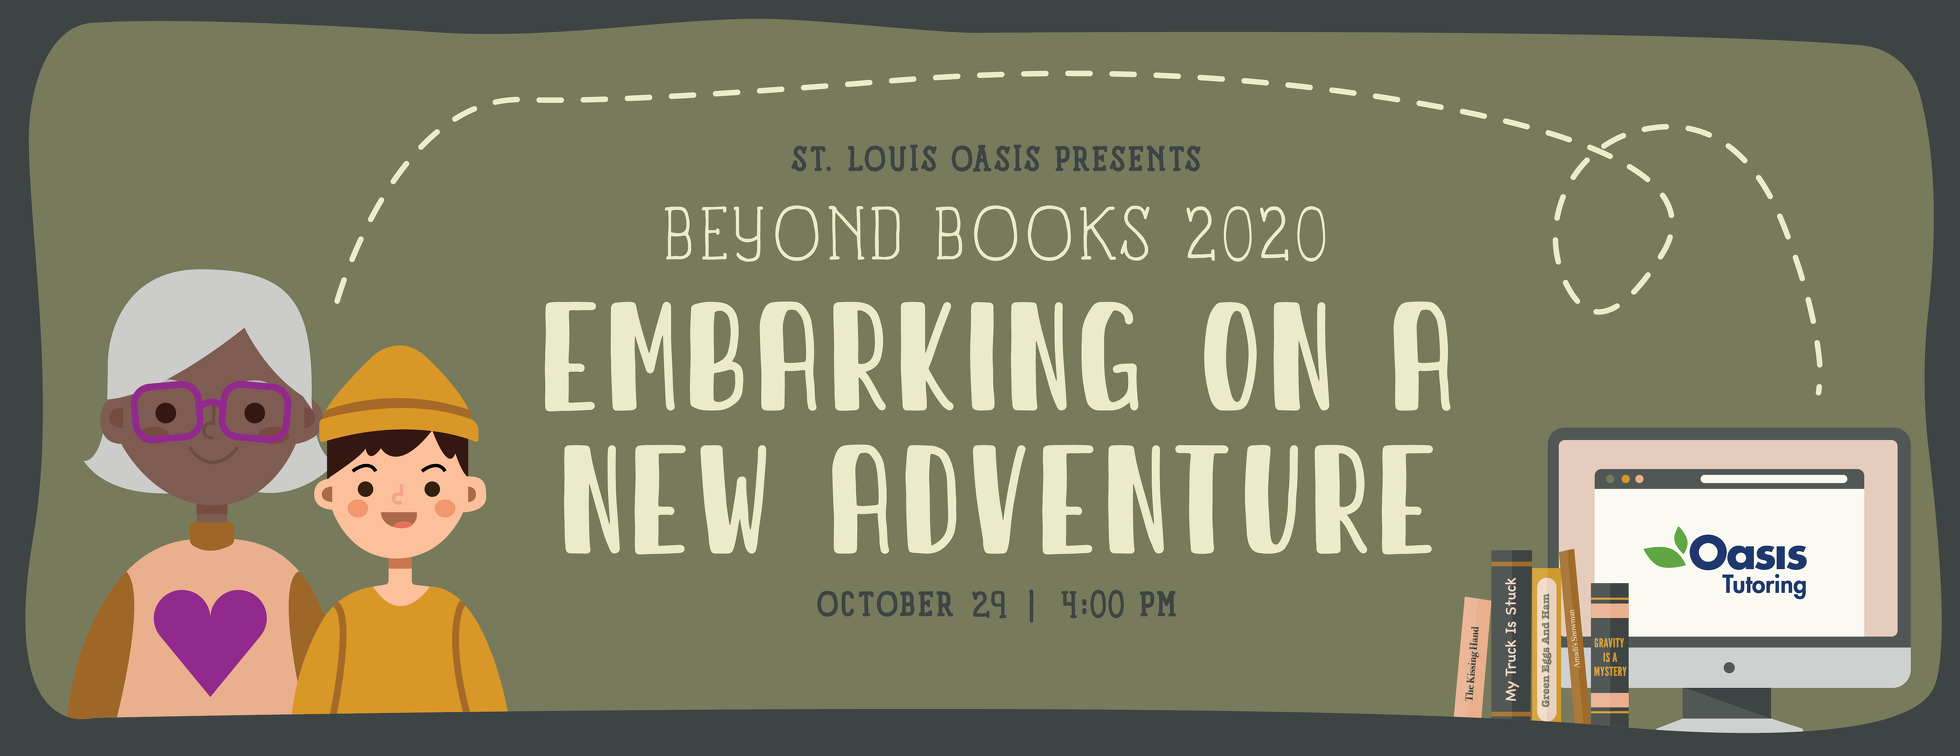 Beyond Books 2020: Embarking on a New Adventure